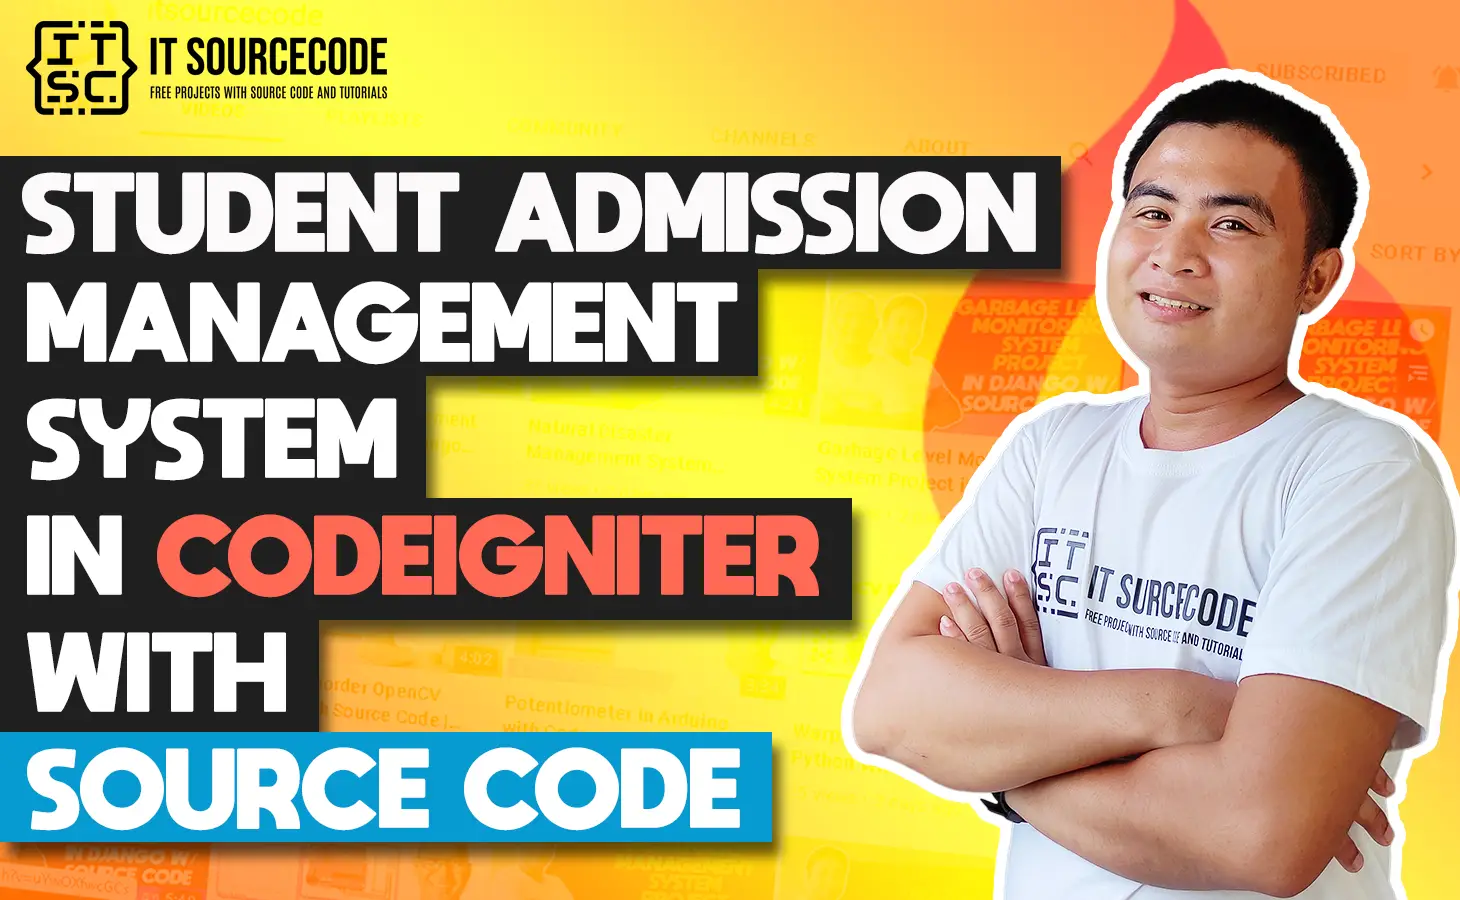 Student Admission Management System In CodeIgniter With Source Code